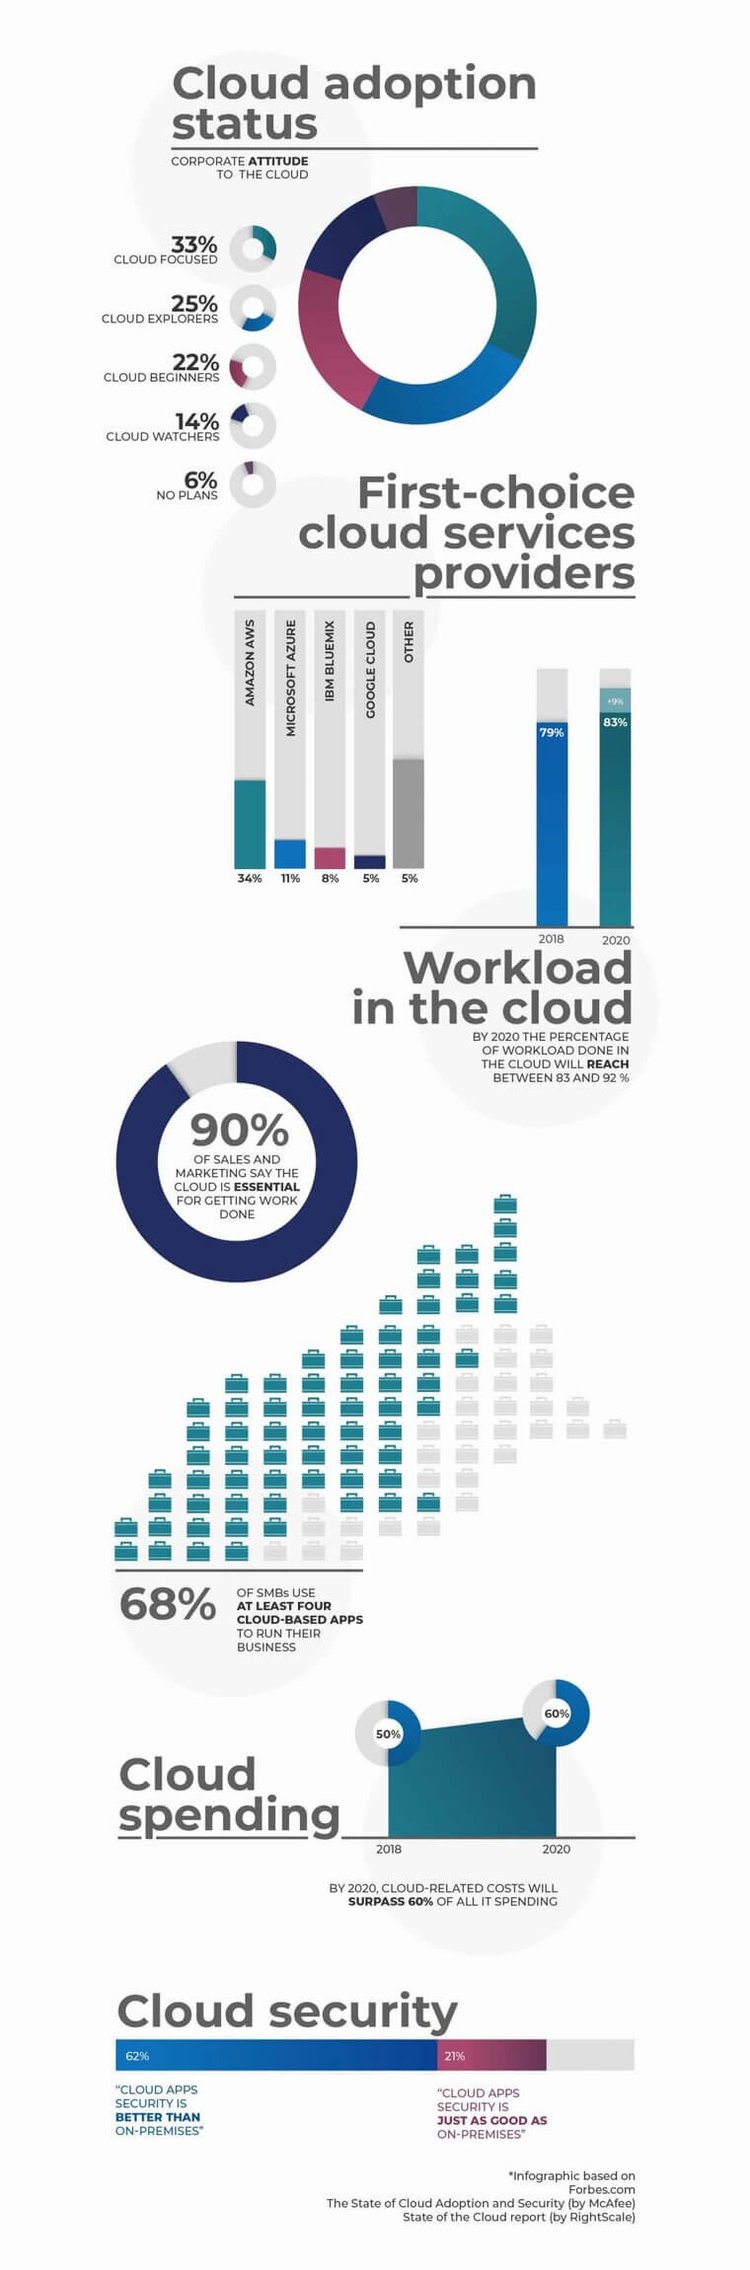 infographic about cloud adoption status, cloud models, and their pros and cons